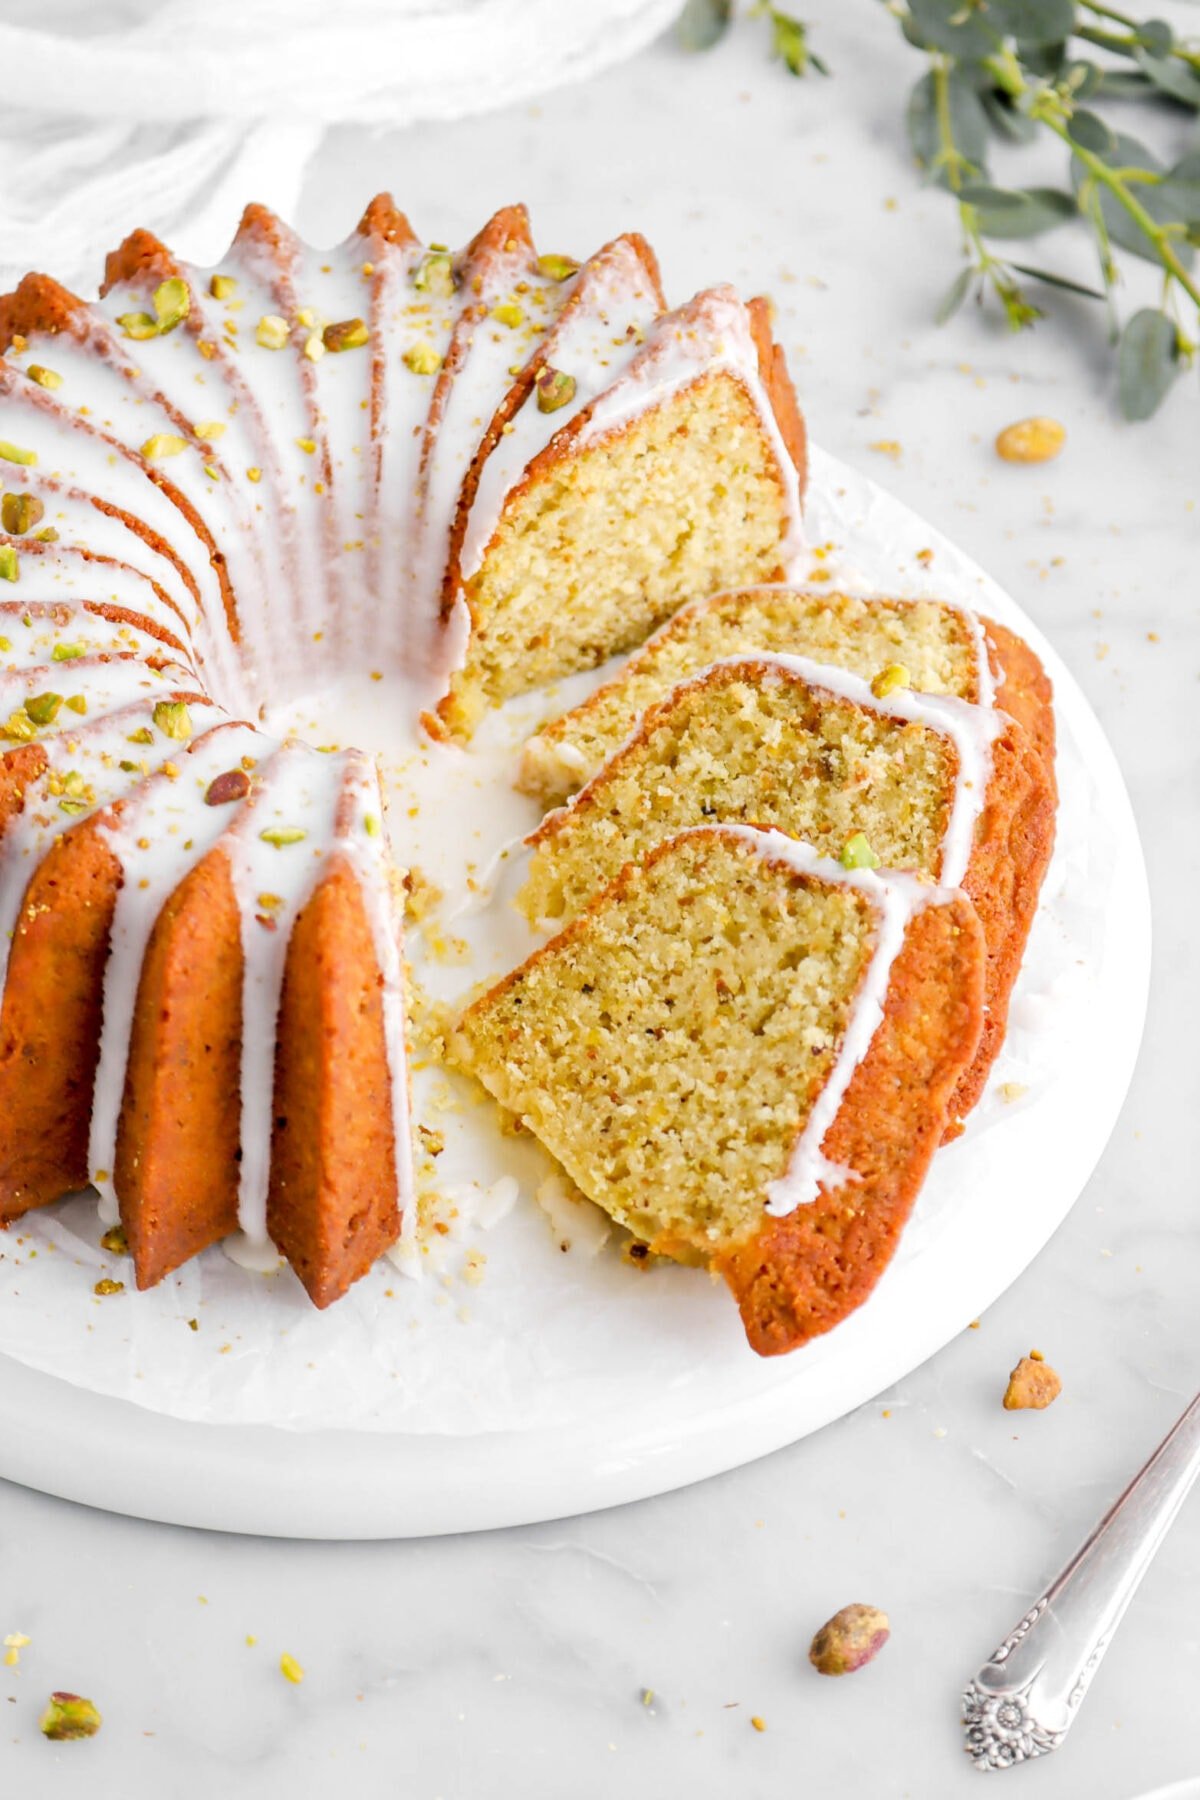 angled close up of three slices of cake laying beside bundt cake on upside down white plate.